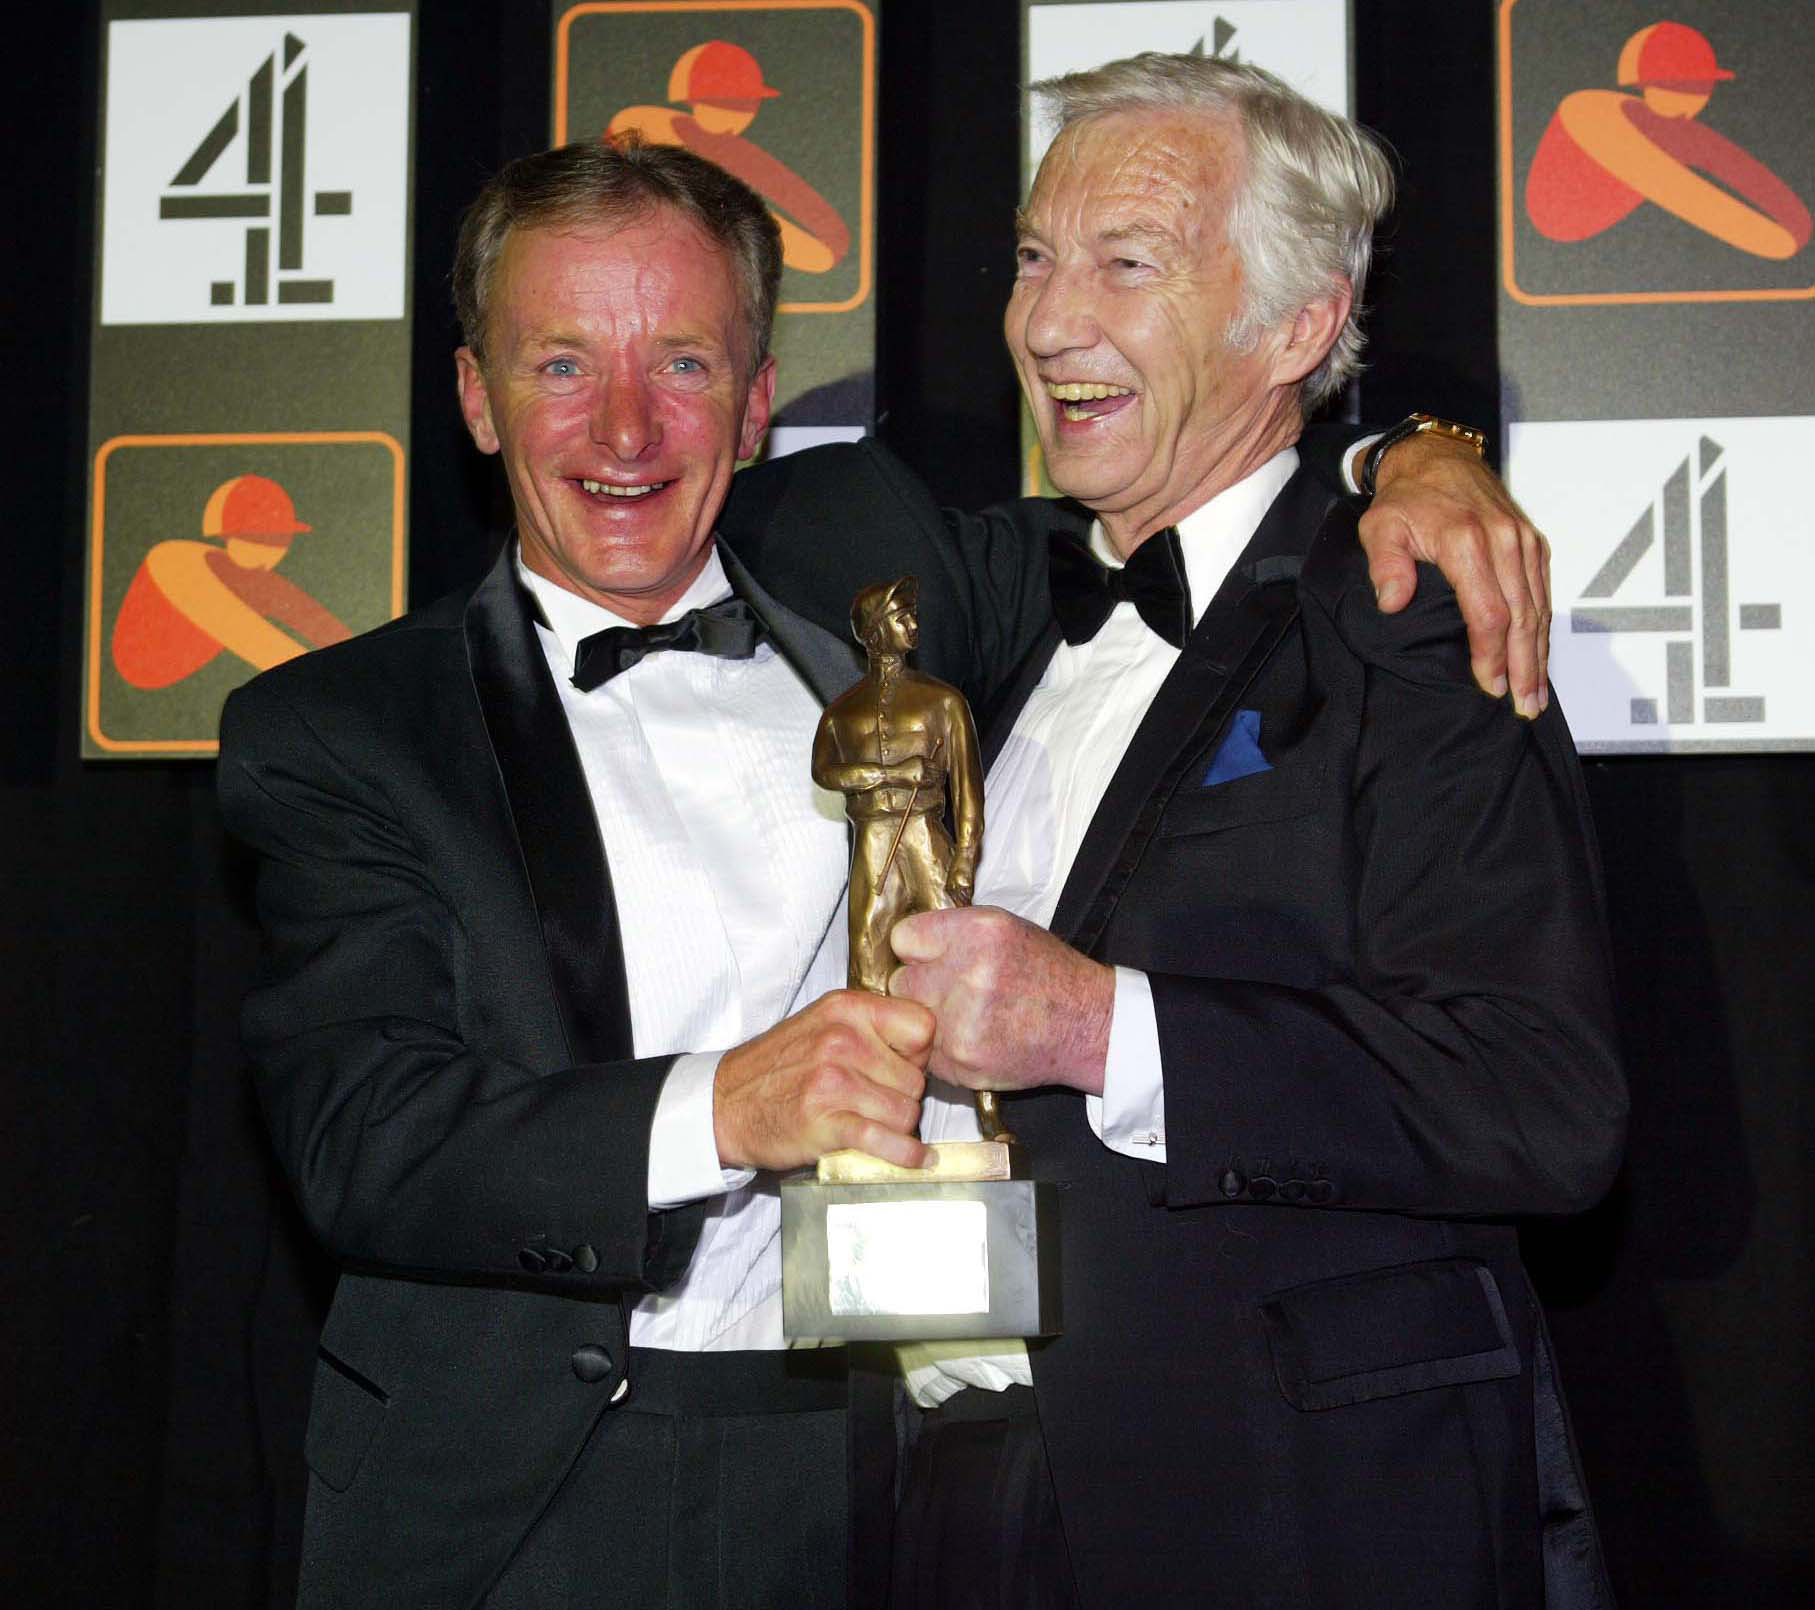 Lester Piggott presents Pat Eddery with his Lesters award in 2004 